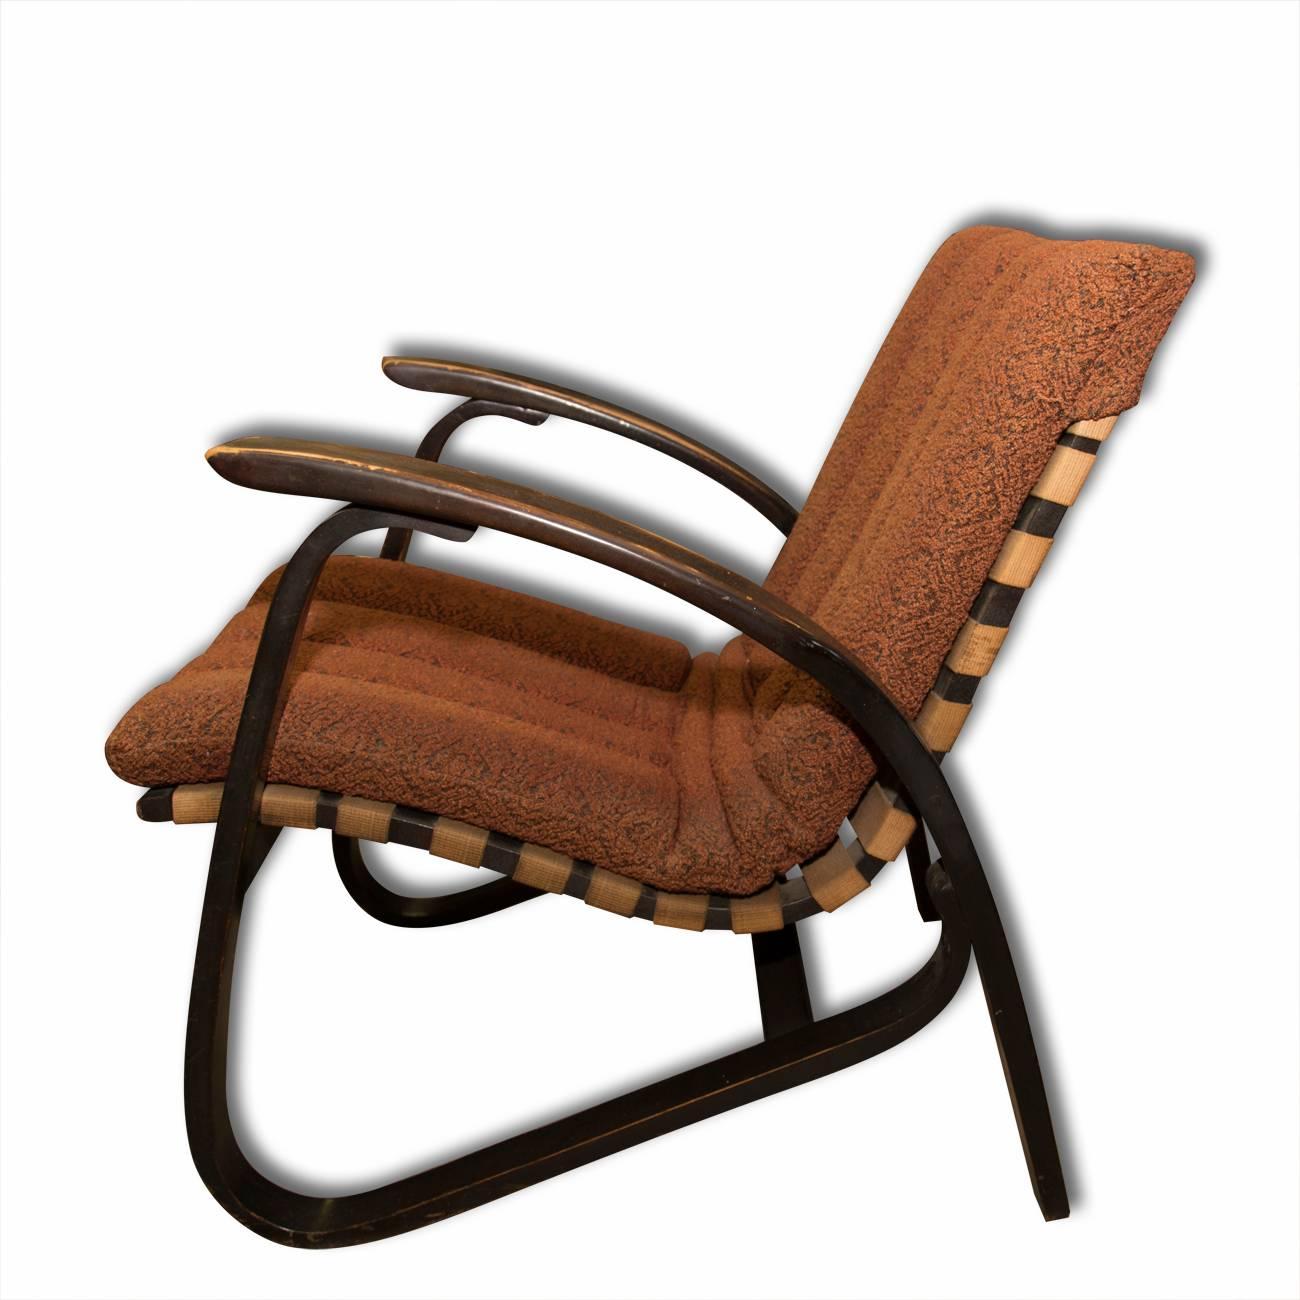 Czech Pair of Bentwood Armchairs with Woven Straps by Jan Vanek for UP Zavody, 1930s